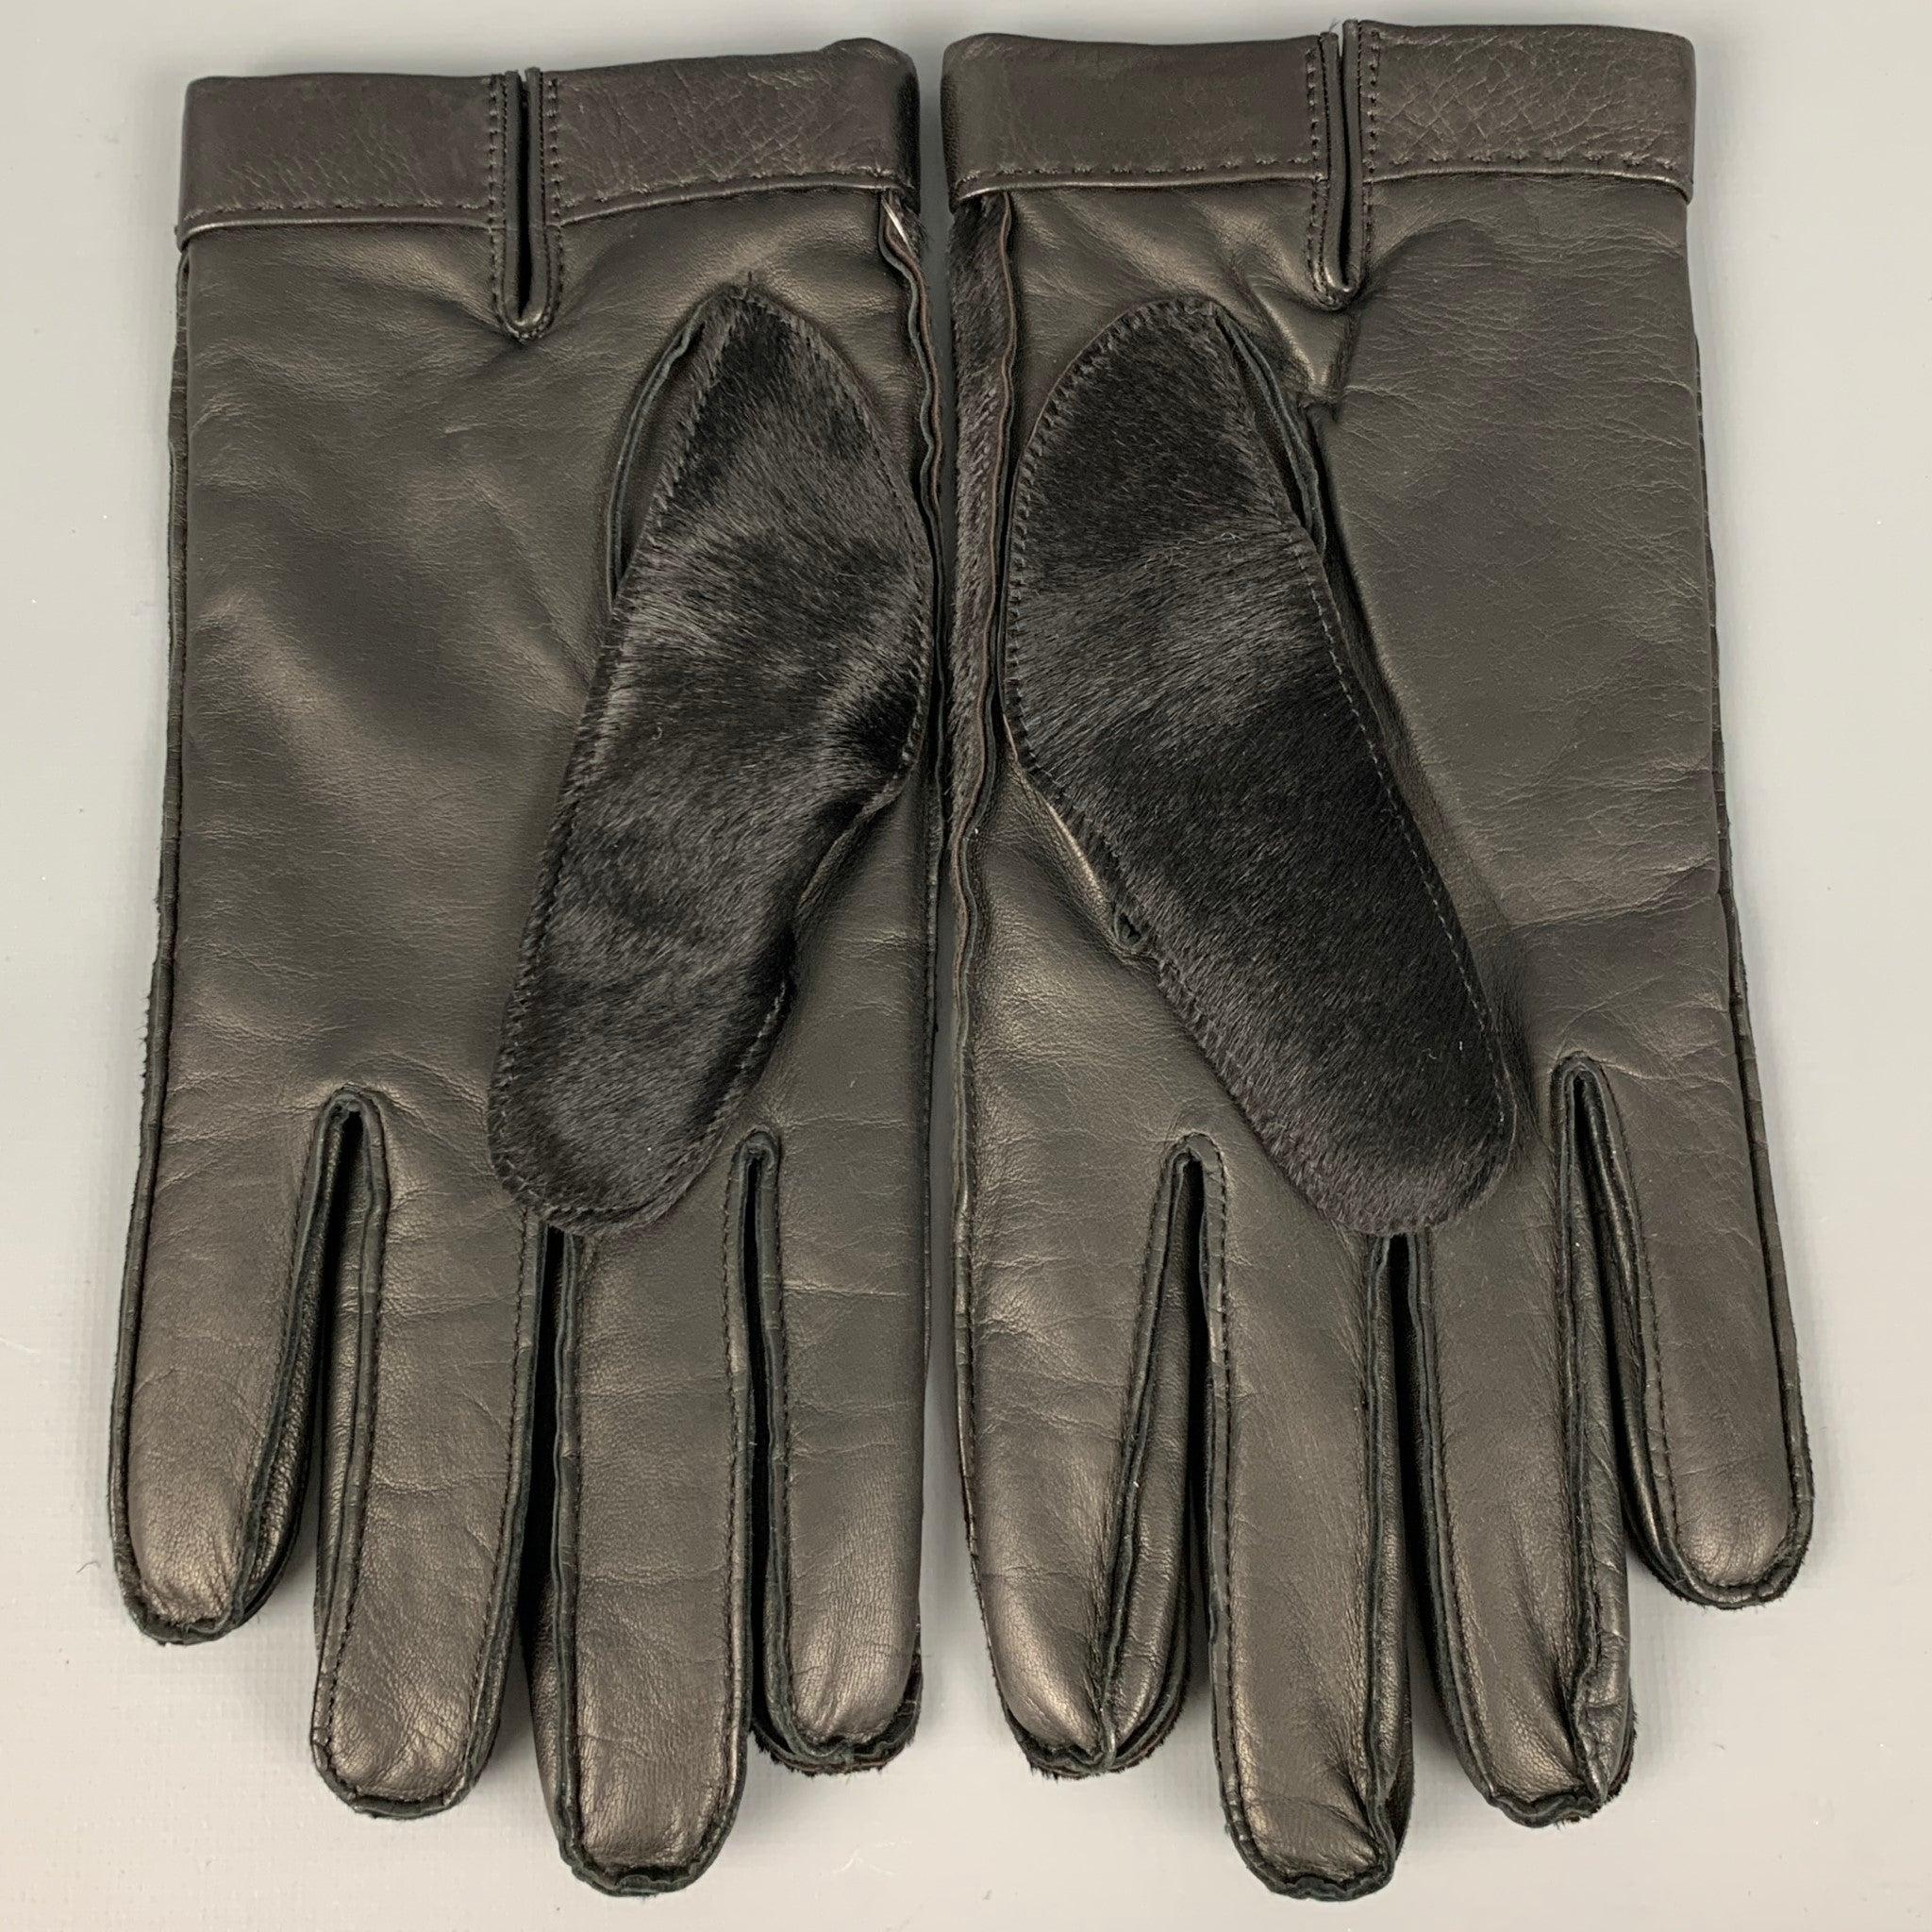 BERGDORF GOODMAN
gloves in a black leather fabric with calf hair sleeves and fingers.Very Good Pre-Owned Condition. Minor signs of wear. 

Marked:   size not marked 

Measurements: 
  Width: 4.25 inches Length: 8.5 in
  
  
 
Reference: